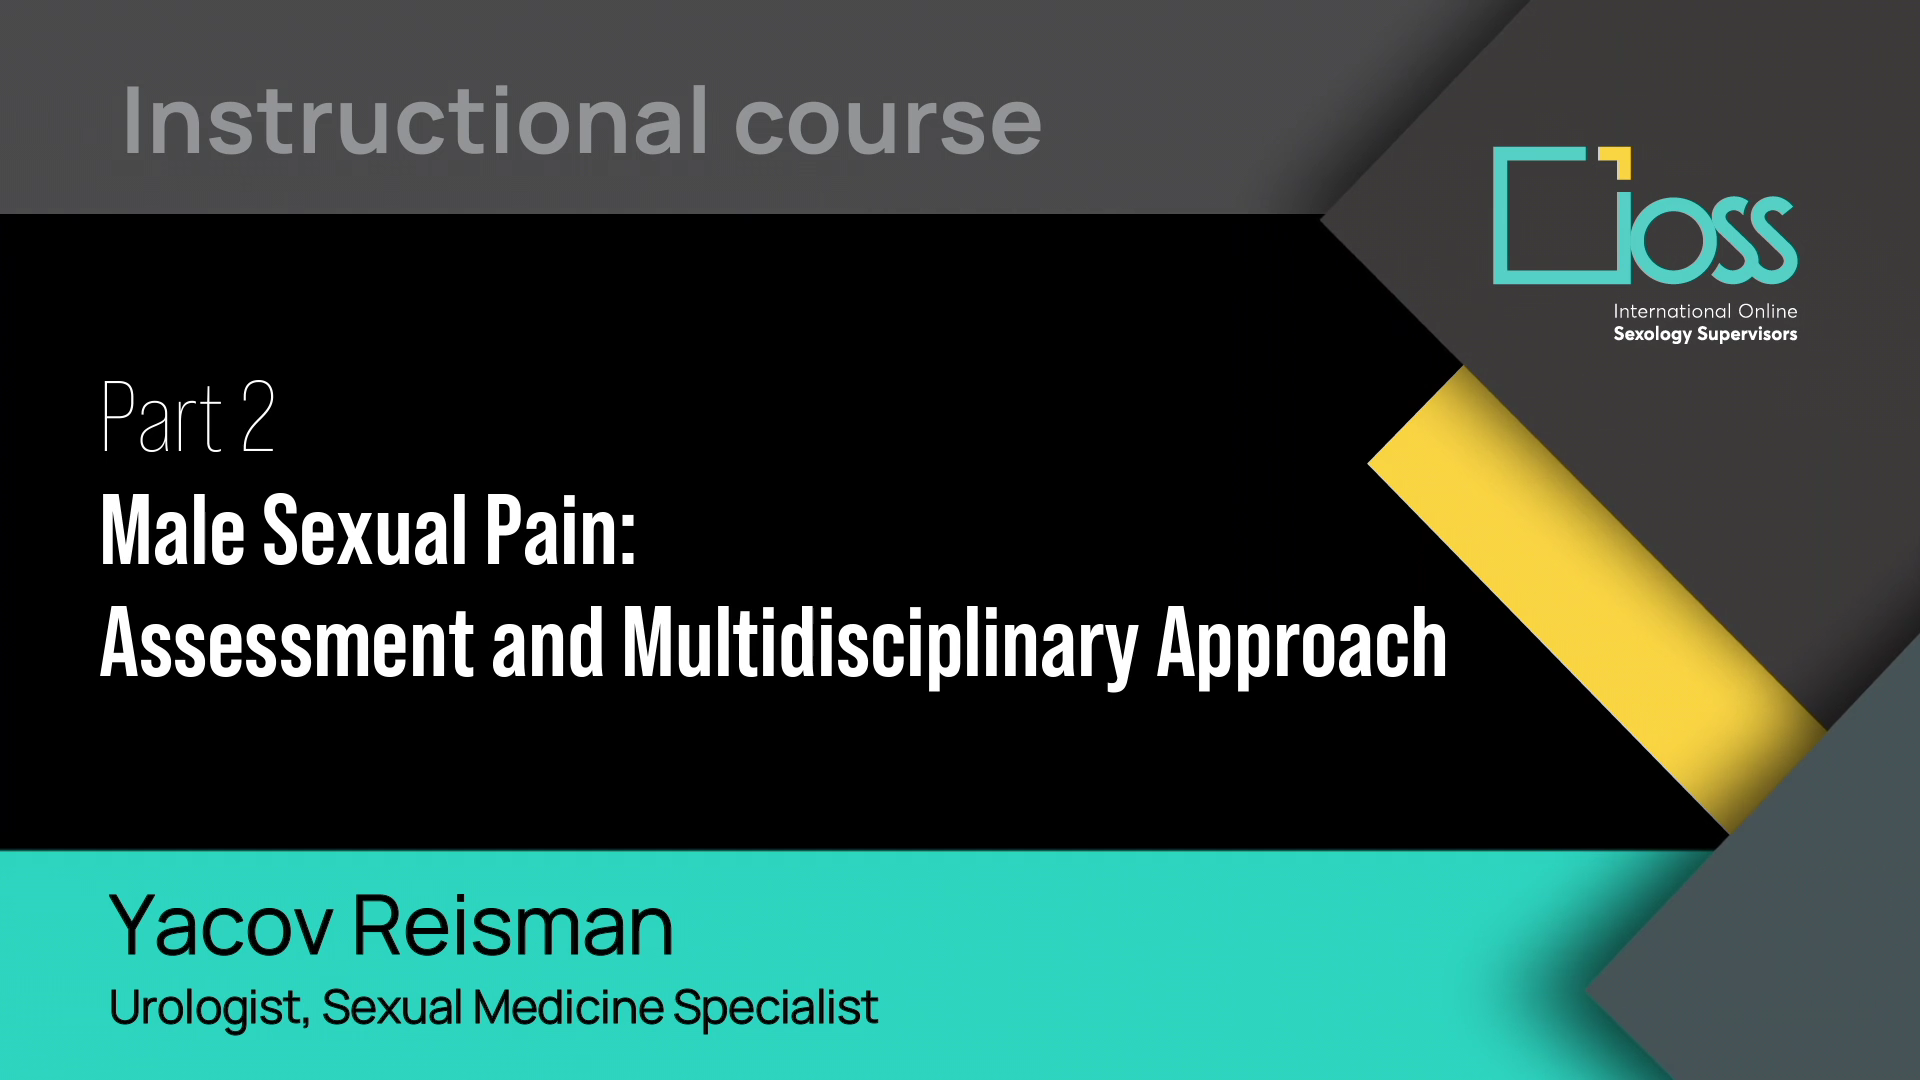 Part 2 Male Sexual Pain: Assessment and Multidisciplinary Approach (Part 1 & 2)